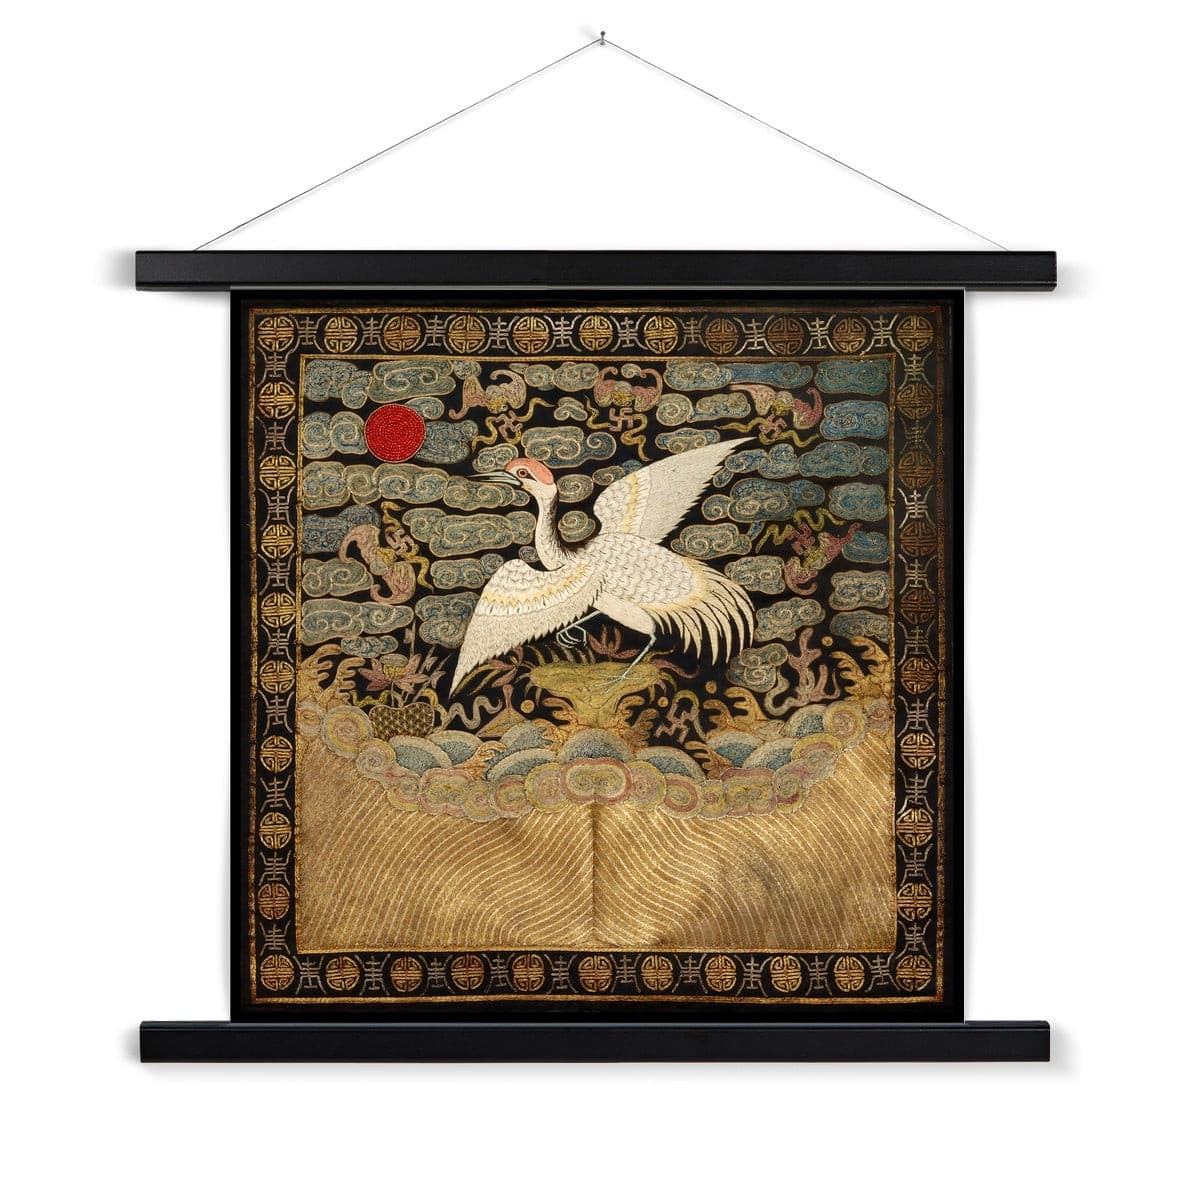 Fine art 12"x12" / Black Frame Qing Dynasty, Chinese Silk Embroidery Heron Mandarin Square Antique Vintage Fine Art Print with Hanger